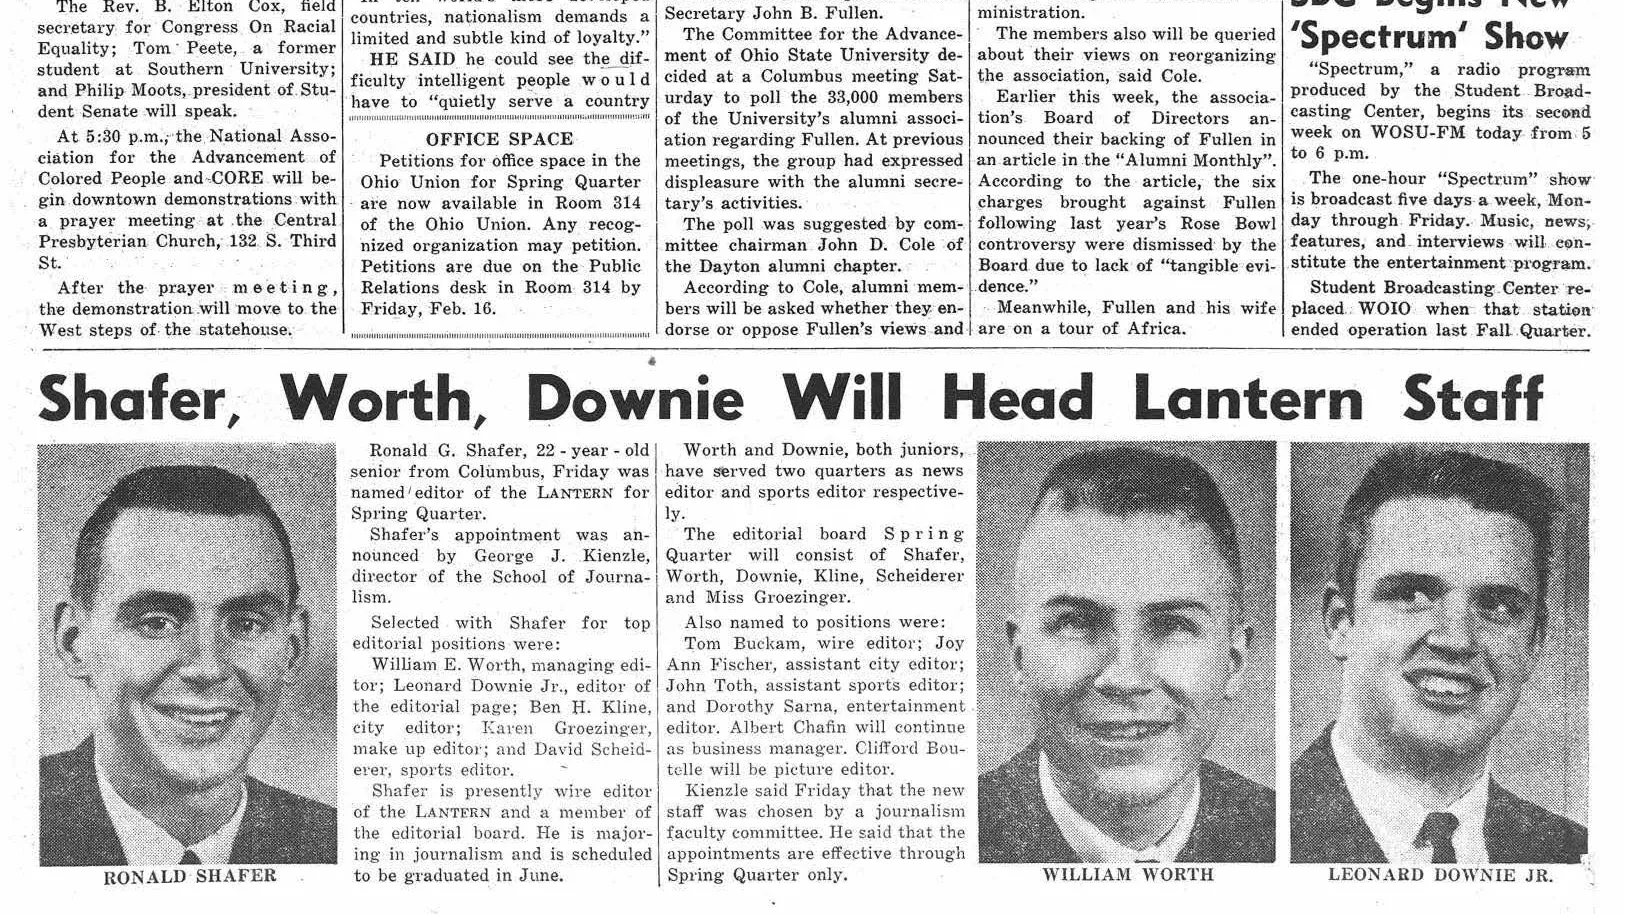 In a clipping from an old student newspaper, a story headlined “Shafer, Worth, Downie will head Lantern staff” gives a short (unreadable) explanation and shows headshots of the three young white men, all with crew cuts and smiles.